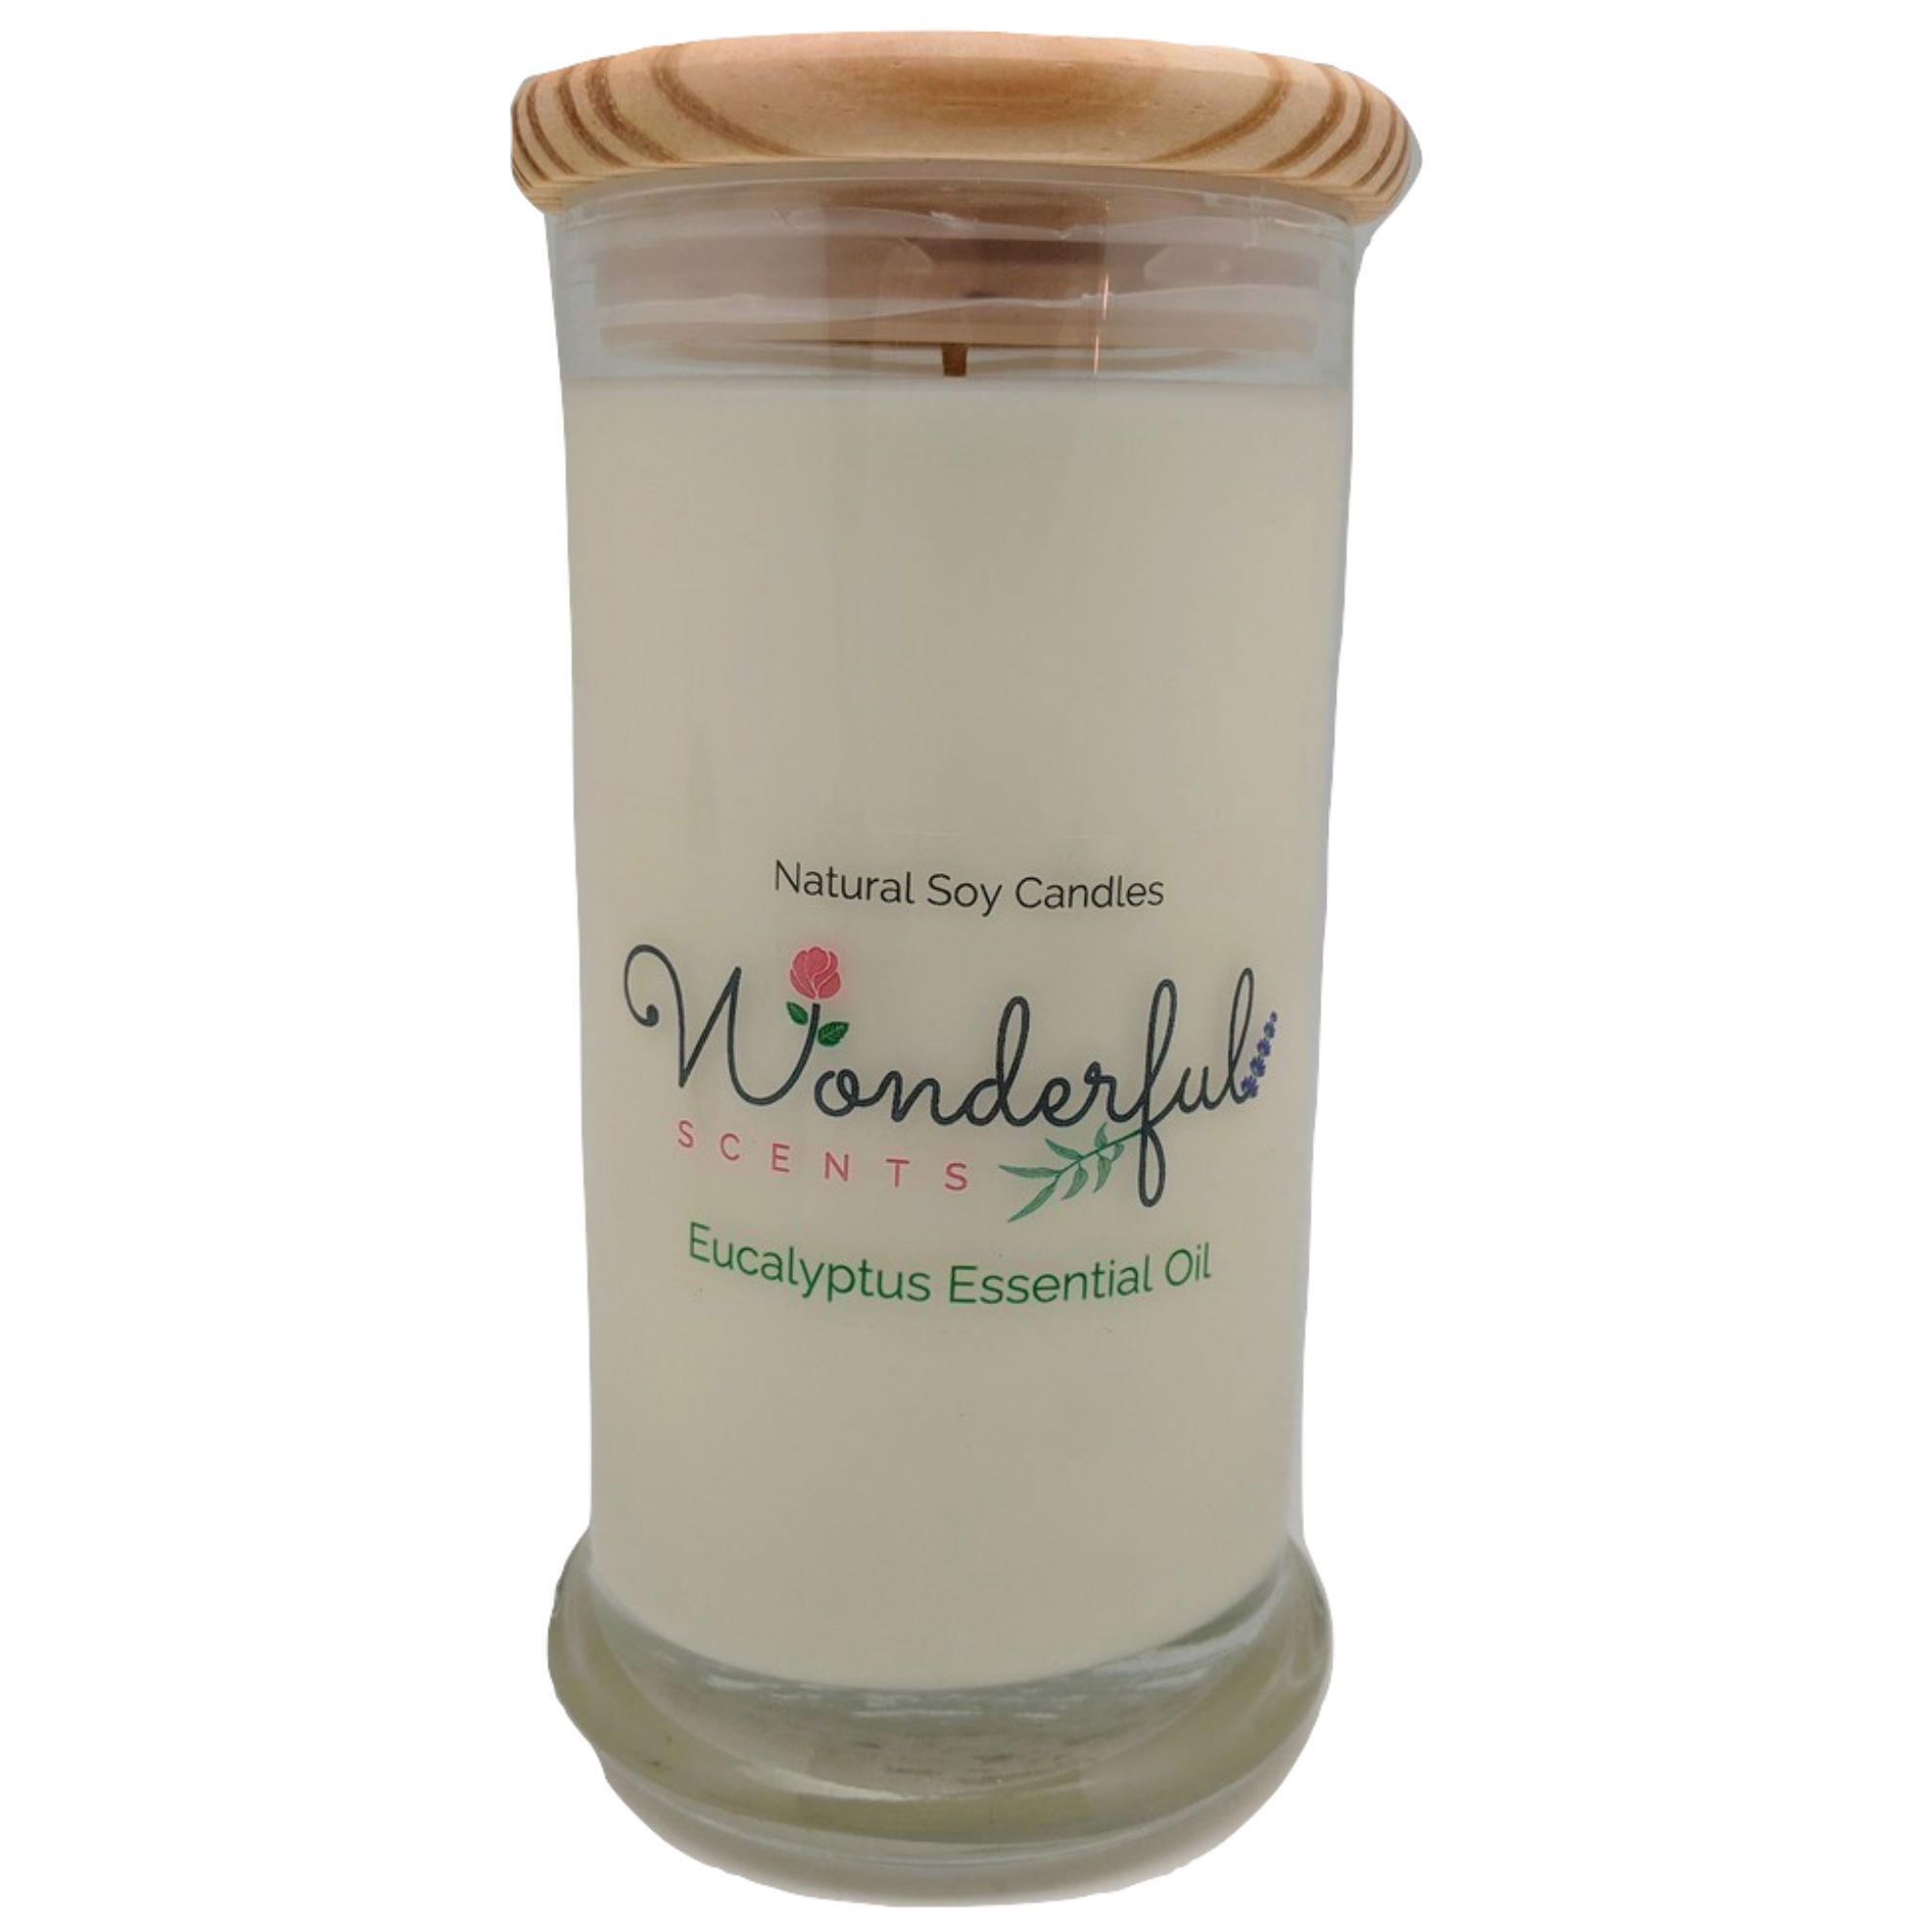 BOGO Sale - Candle Tin 8 oz. Soy Candle with Cotton Wicks buy one get one  free